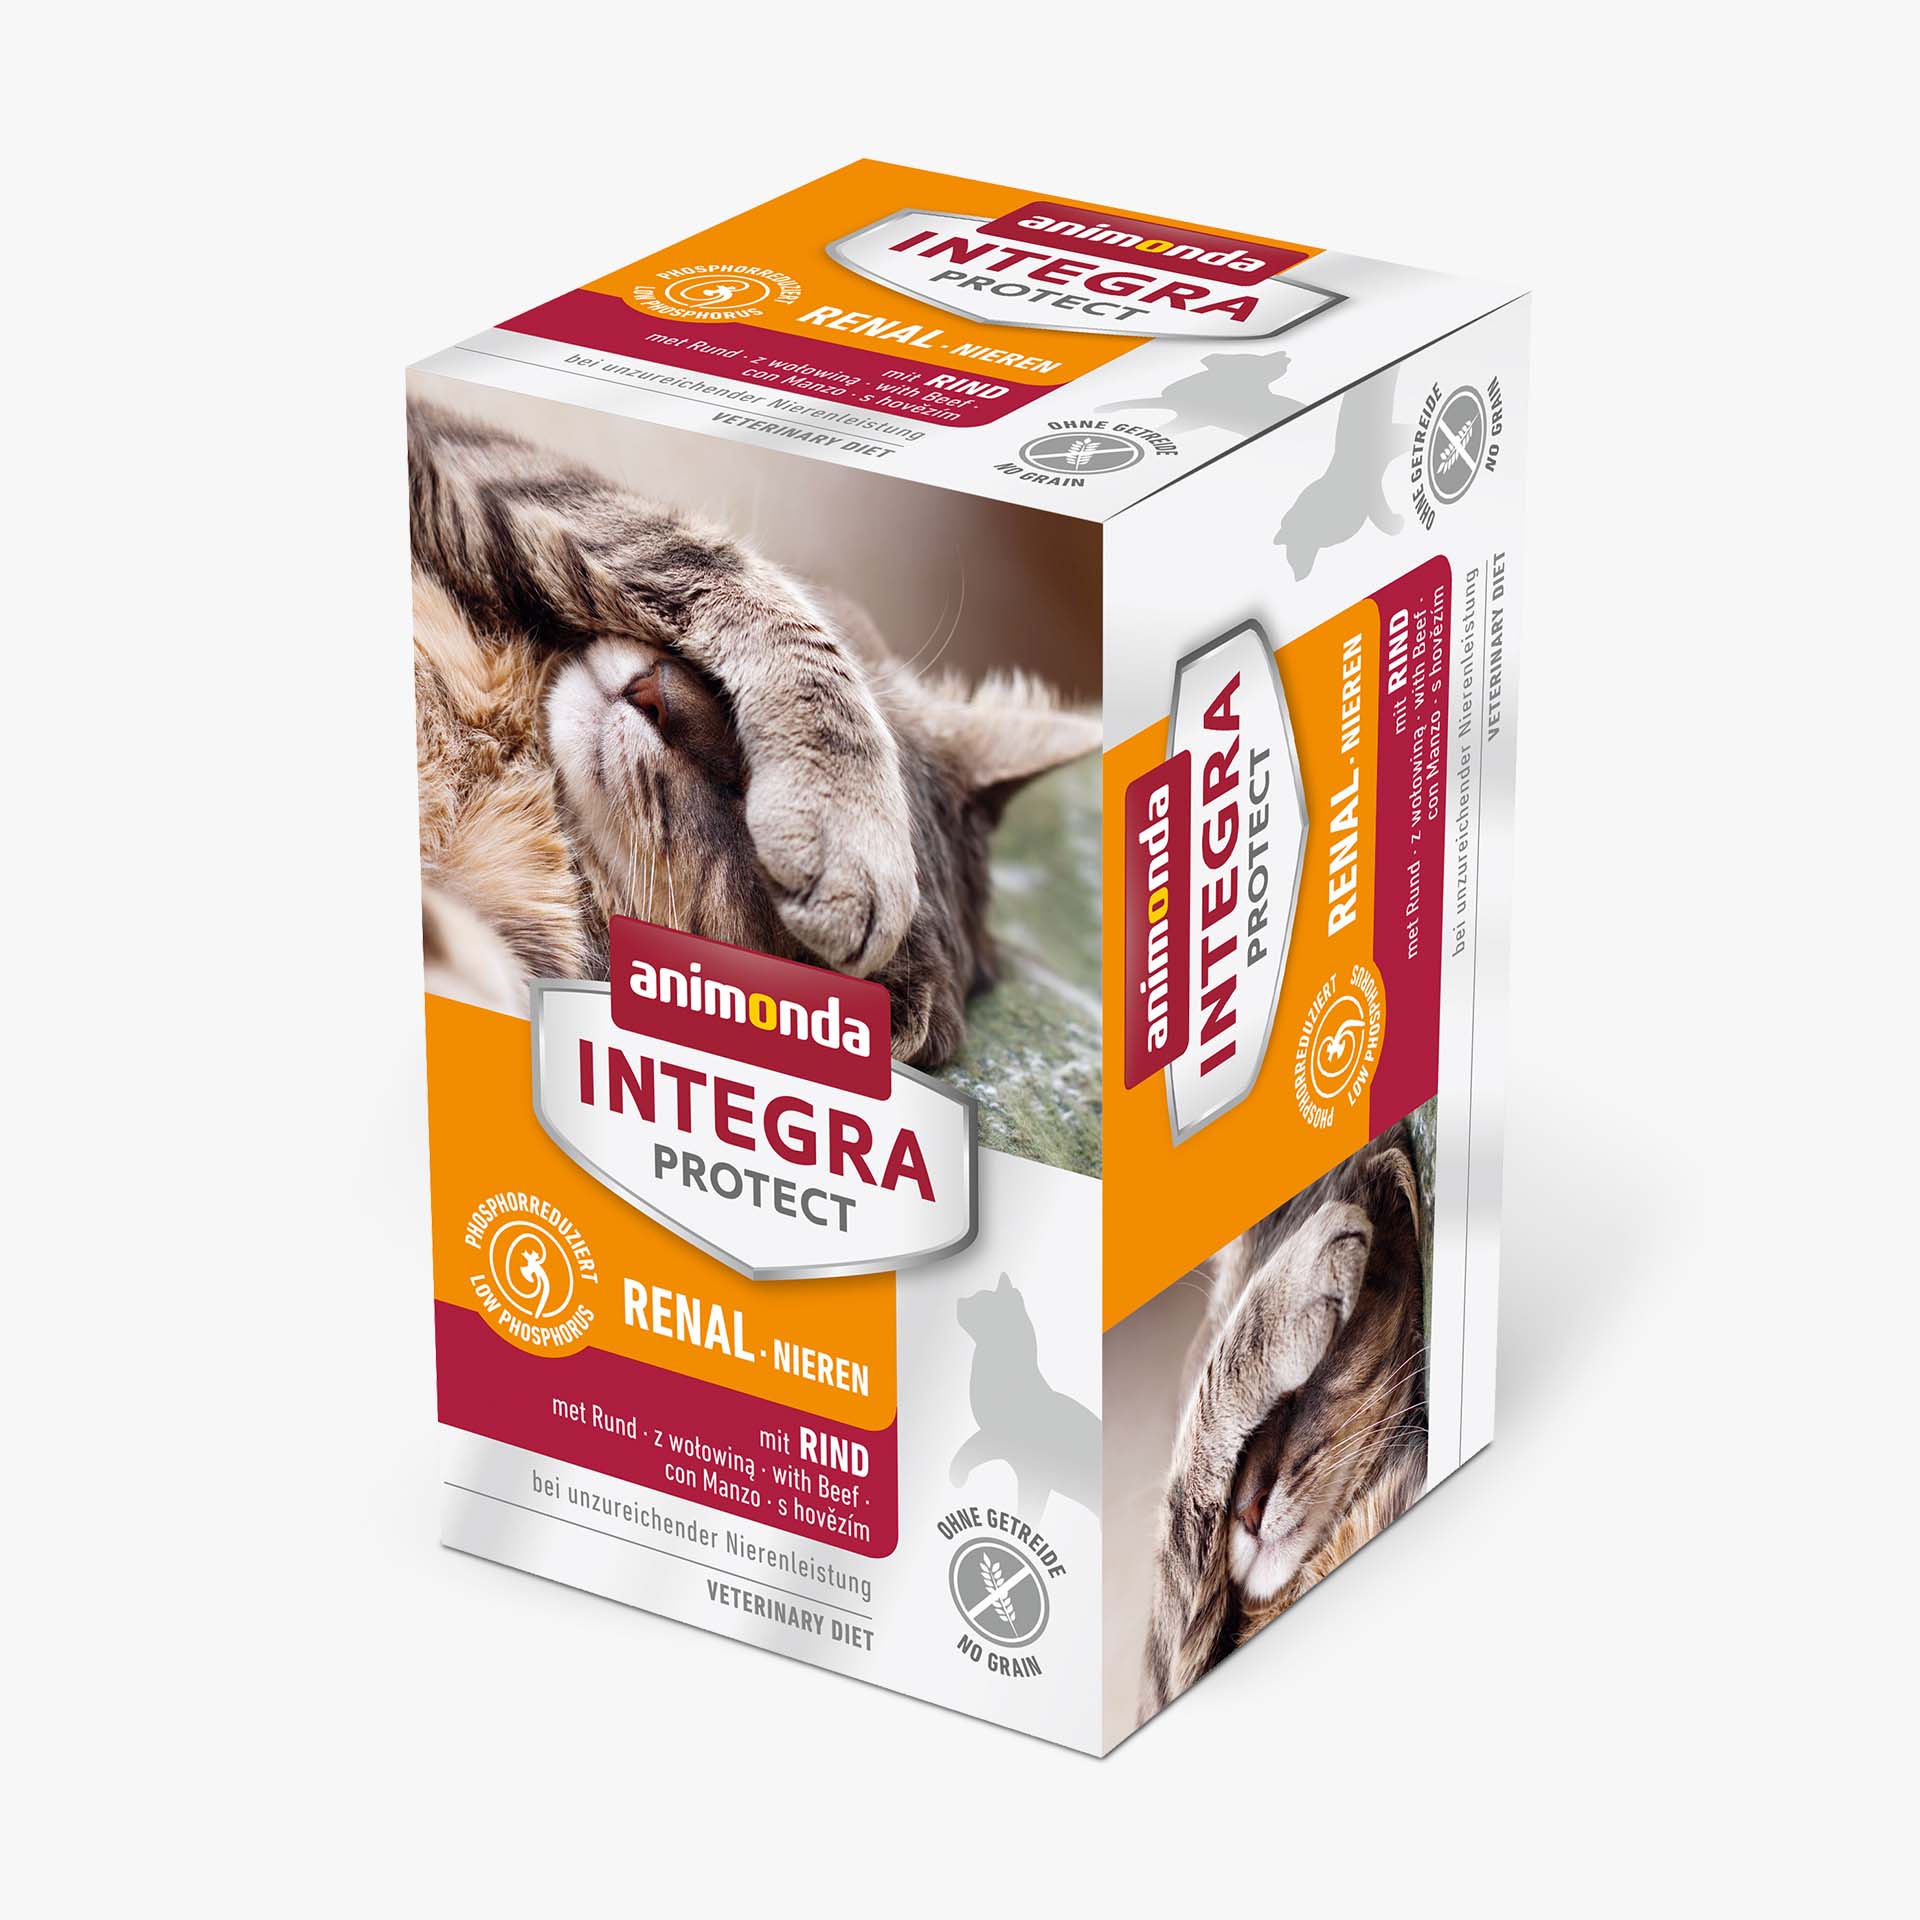 INTEGRA PROTECT with Beef Renal